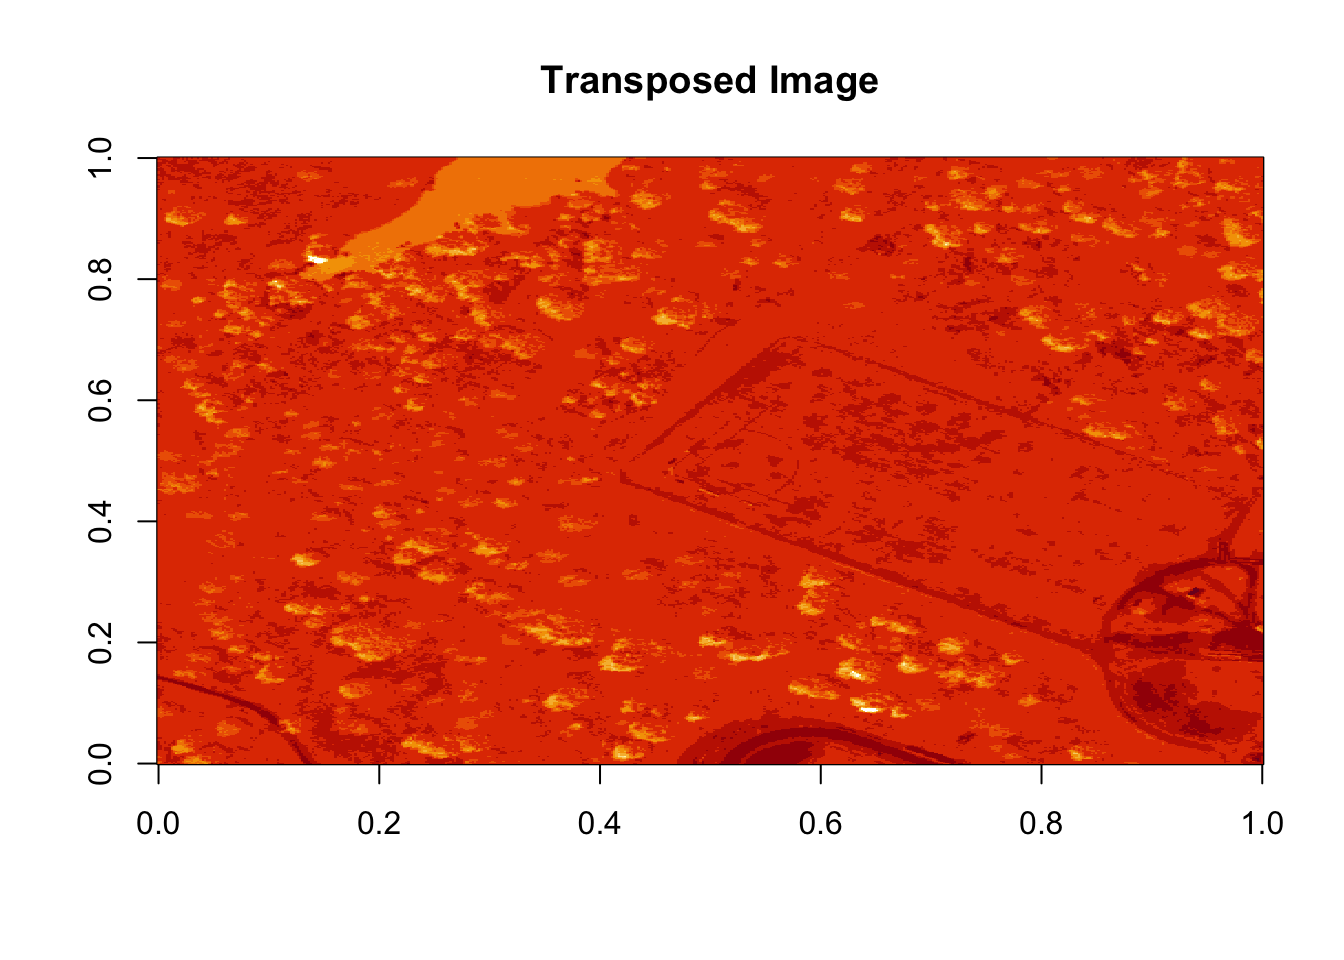 Plot showing the transposed image of the log transformed reflectance values of b9. The orientation of the image is rotated in our log transformed image, because R reads in the matrices starting from the upper left hand corner.